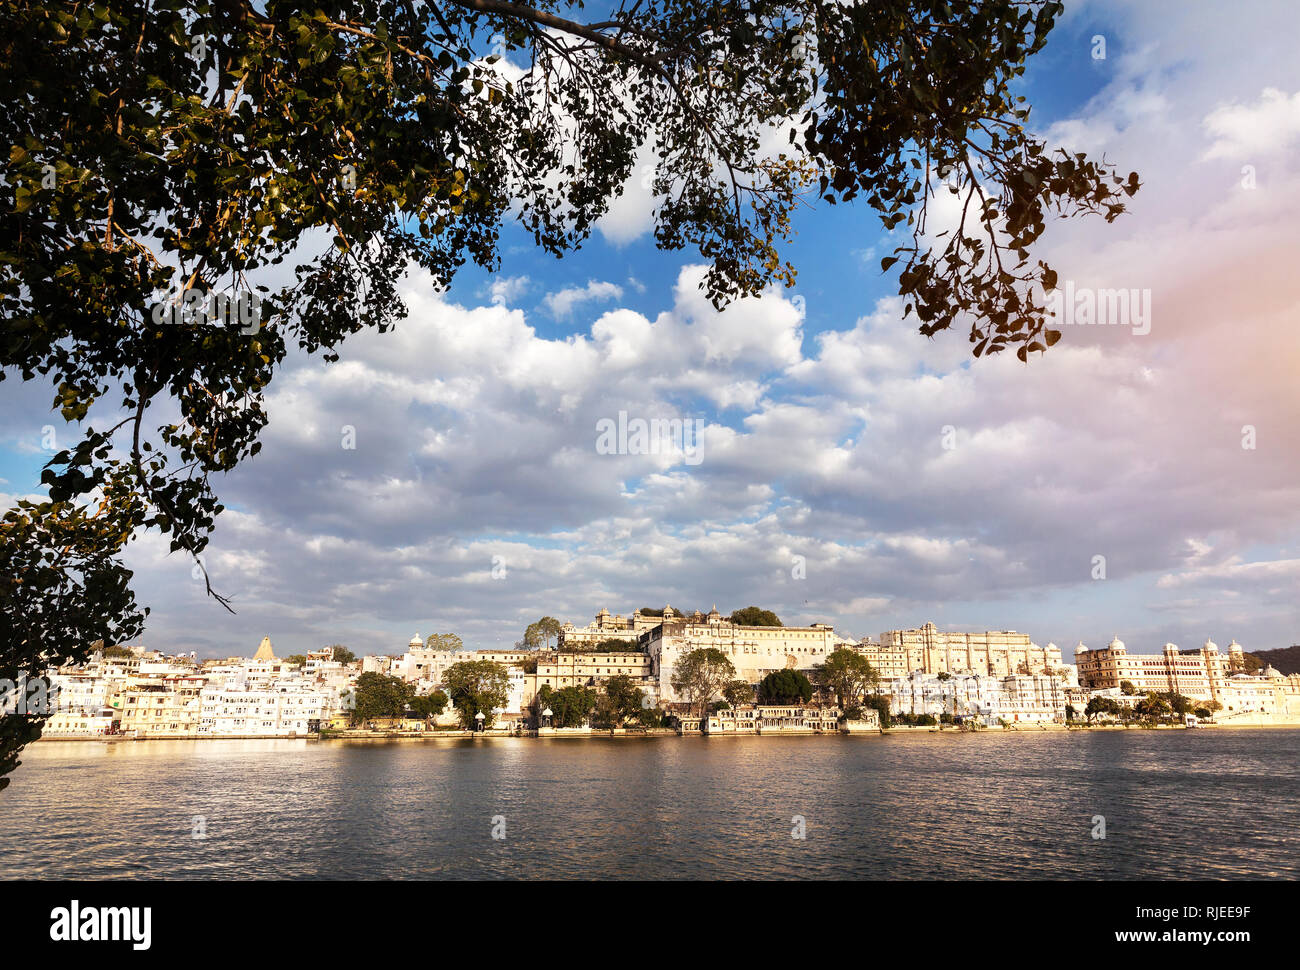 Lake Pichola with City Palace view at cloudy sunset sky in Udaipur, Rajasthan, India Stock Photo